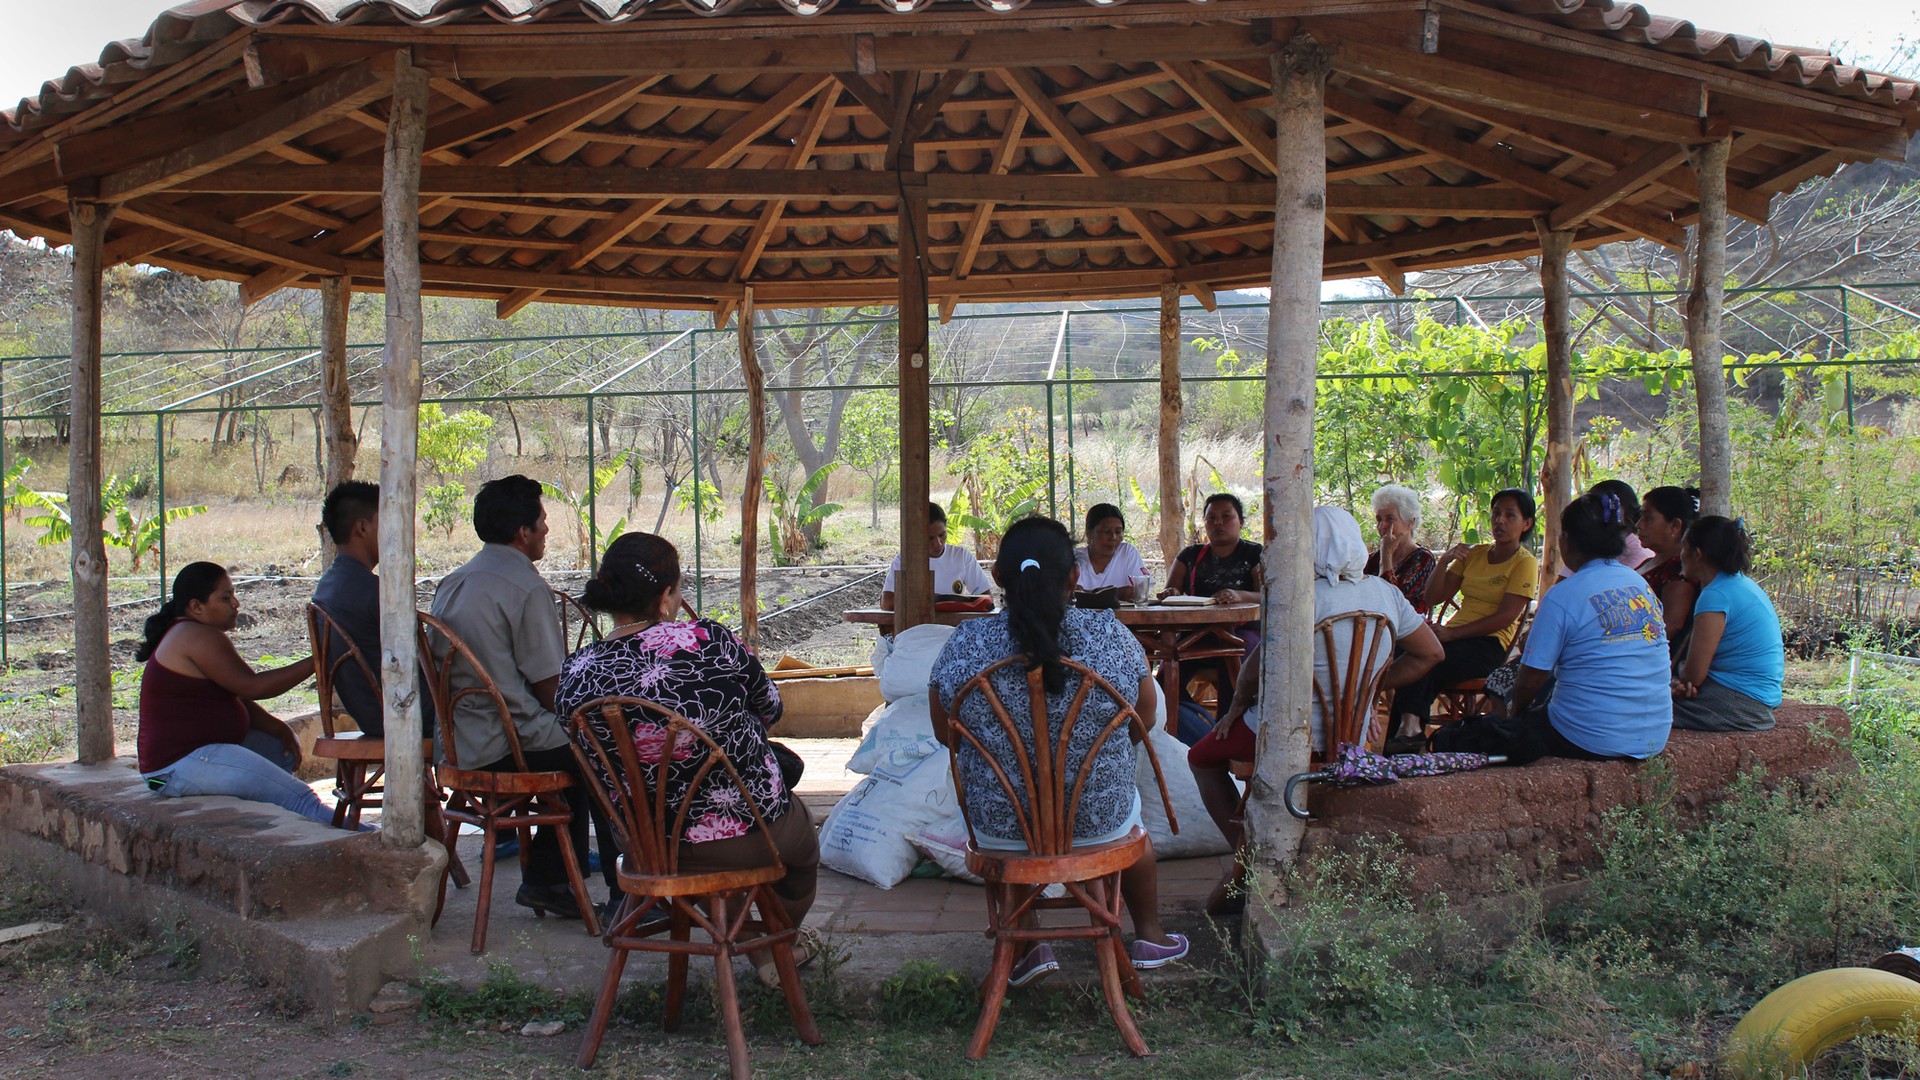 The Mujeres Solares, or Solar Women, of Totogalpa gather for their biweekly Monday meeting on March 9, 2015. The women host students, help with community projects, build solar cookers and teach others to build them, among other activities, as an example of gender empowerment. (Photo by Molly Bilker)